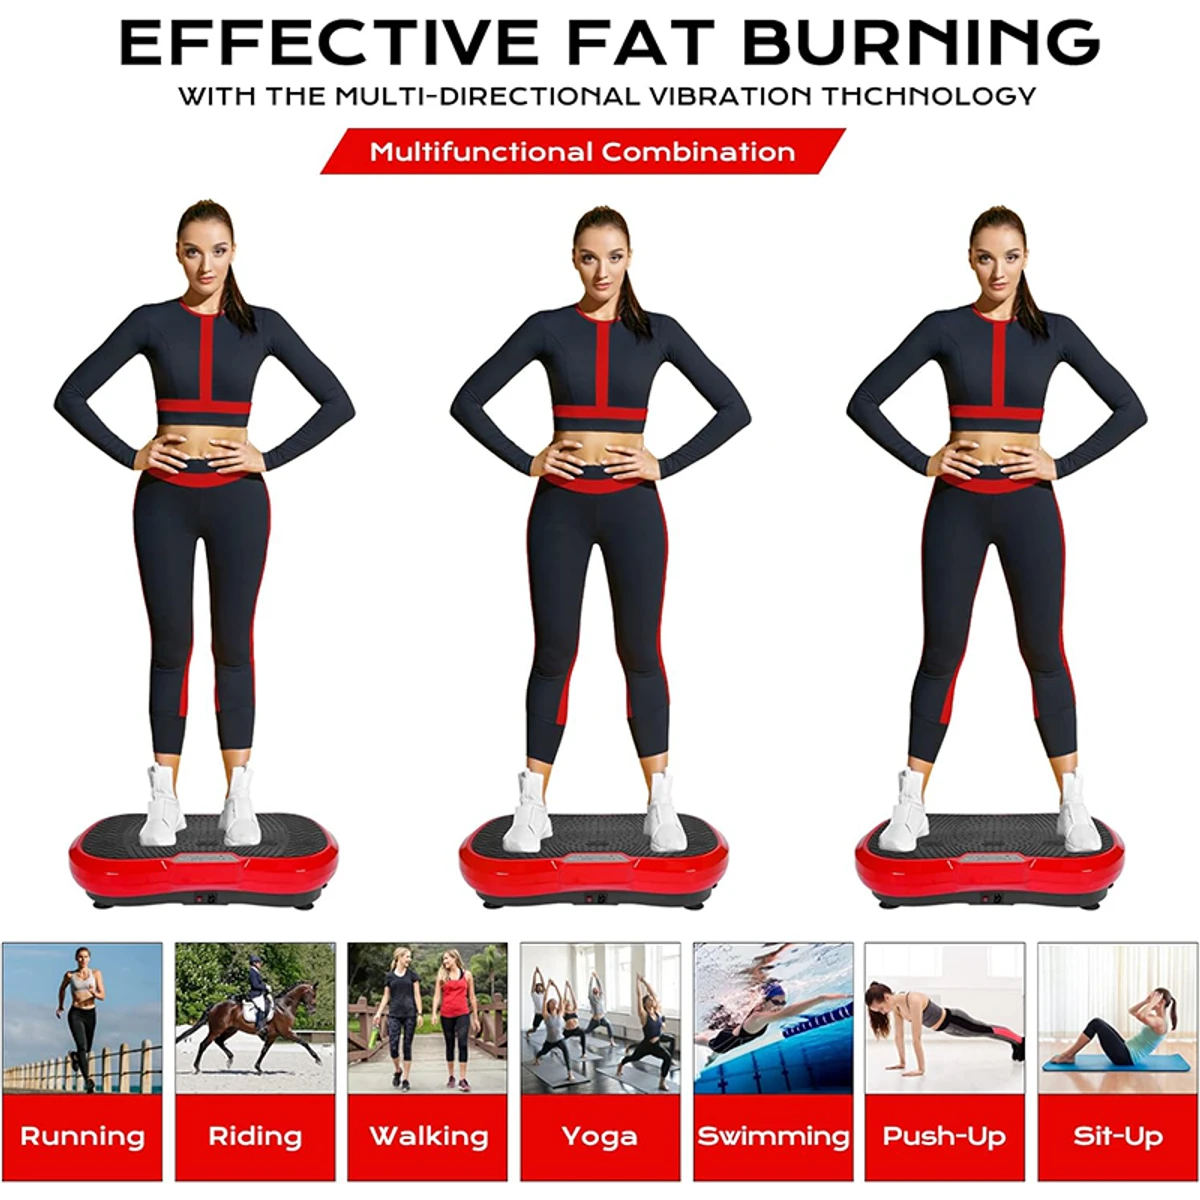 Body Slimming Vibration Plate Massager, Home & Gym Workout Machine for Muscle Toning, Calorie Burning, Massaging, Weight Loss, Pain Relief & Comes with 5 Program Mode with Remote, 2 Exercise Ban